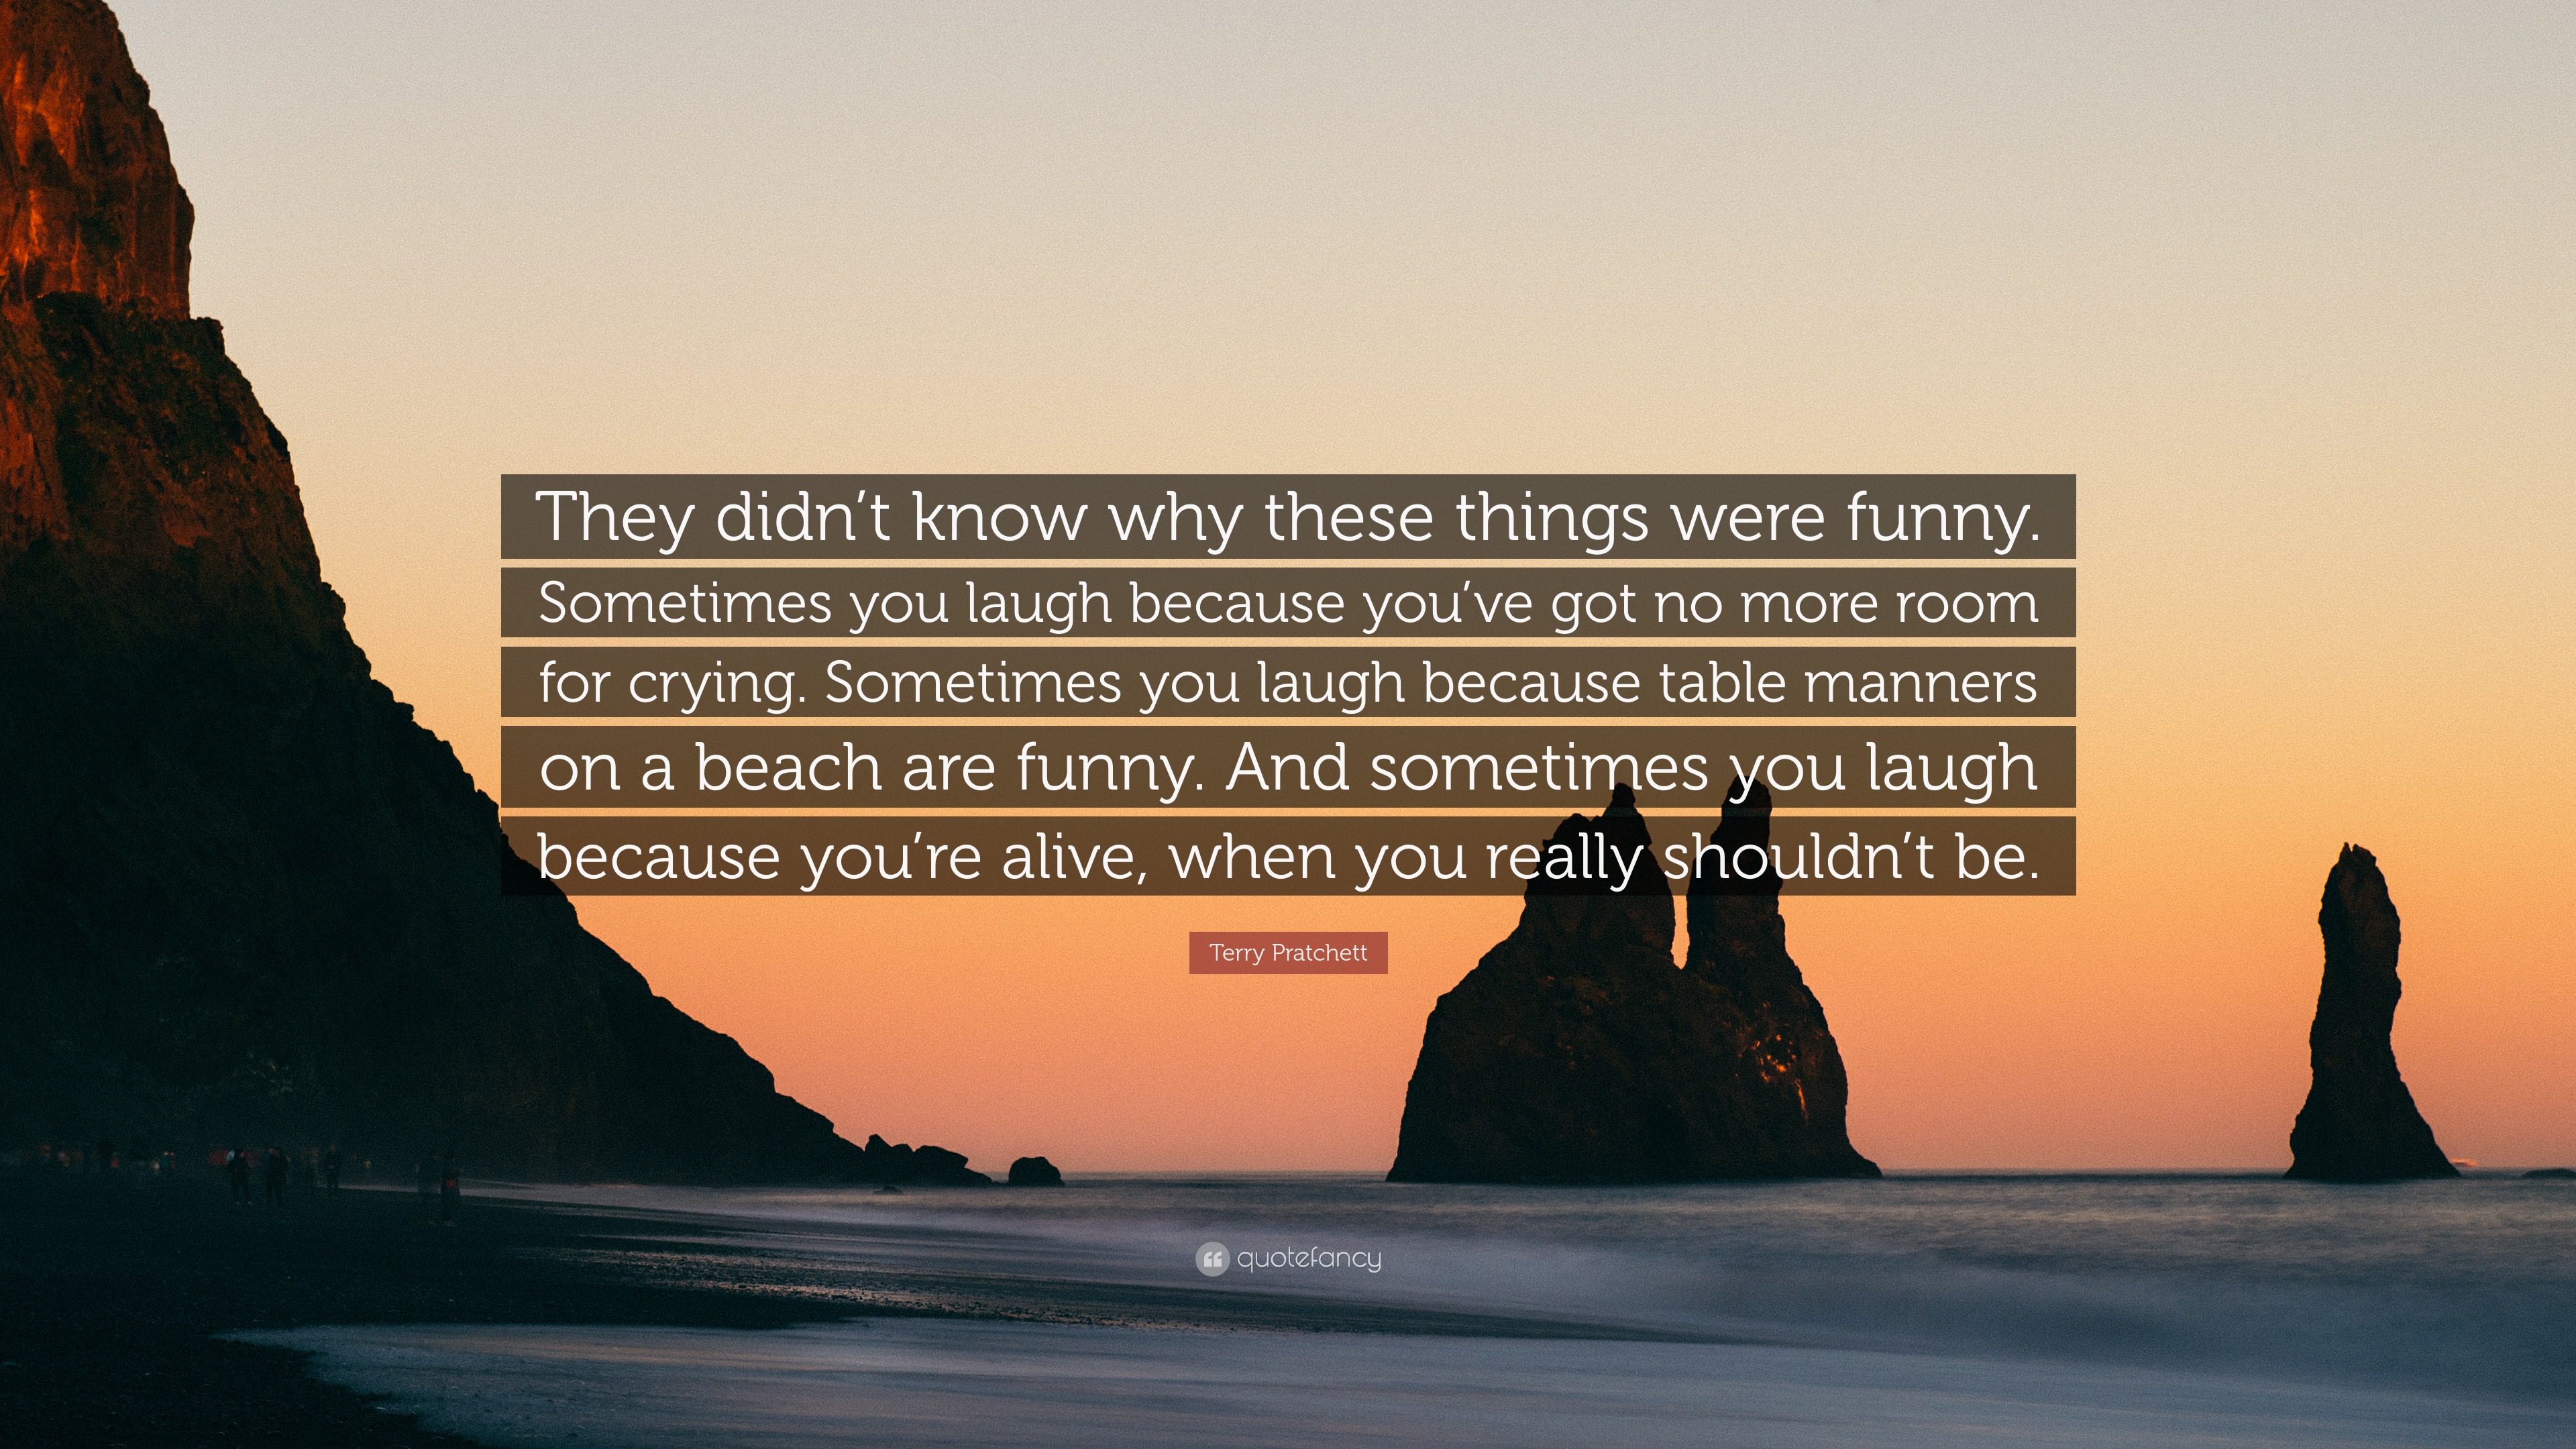 Terry Pratchett Quote: “They didn't know why these things were funny. Sometimes  you laugh because you've got no more room for crying. Sometimes ...”